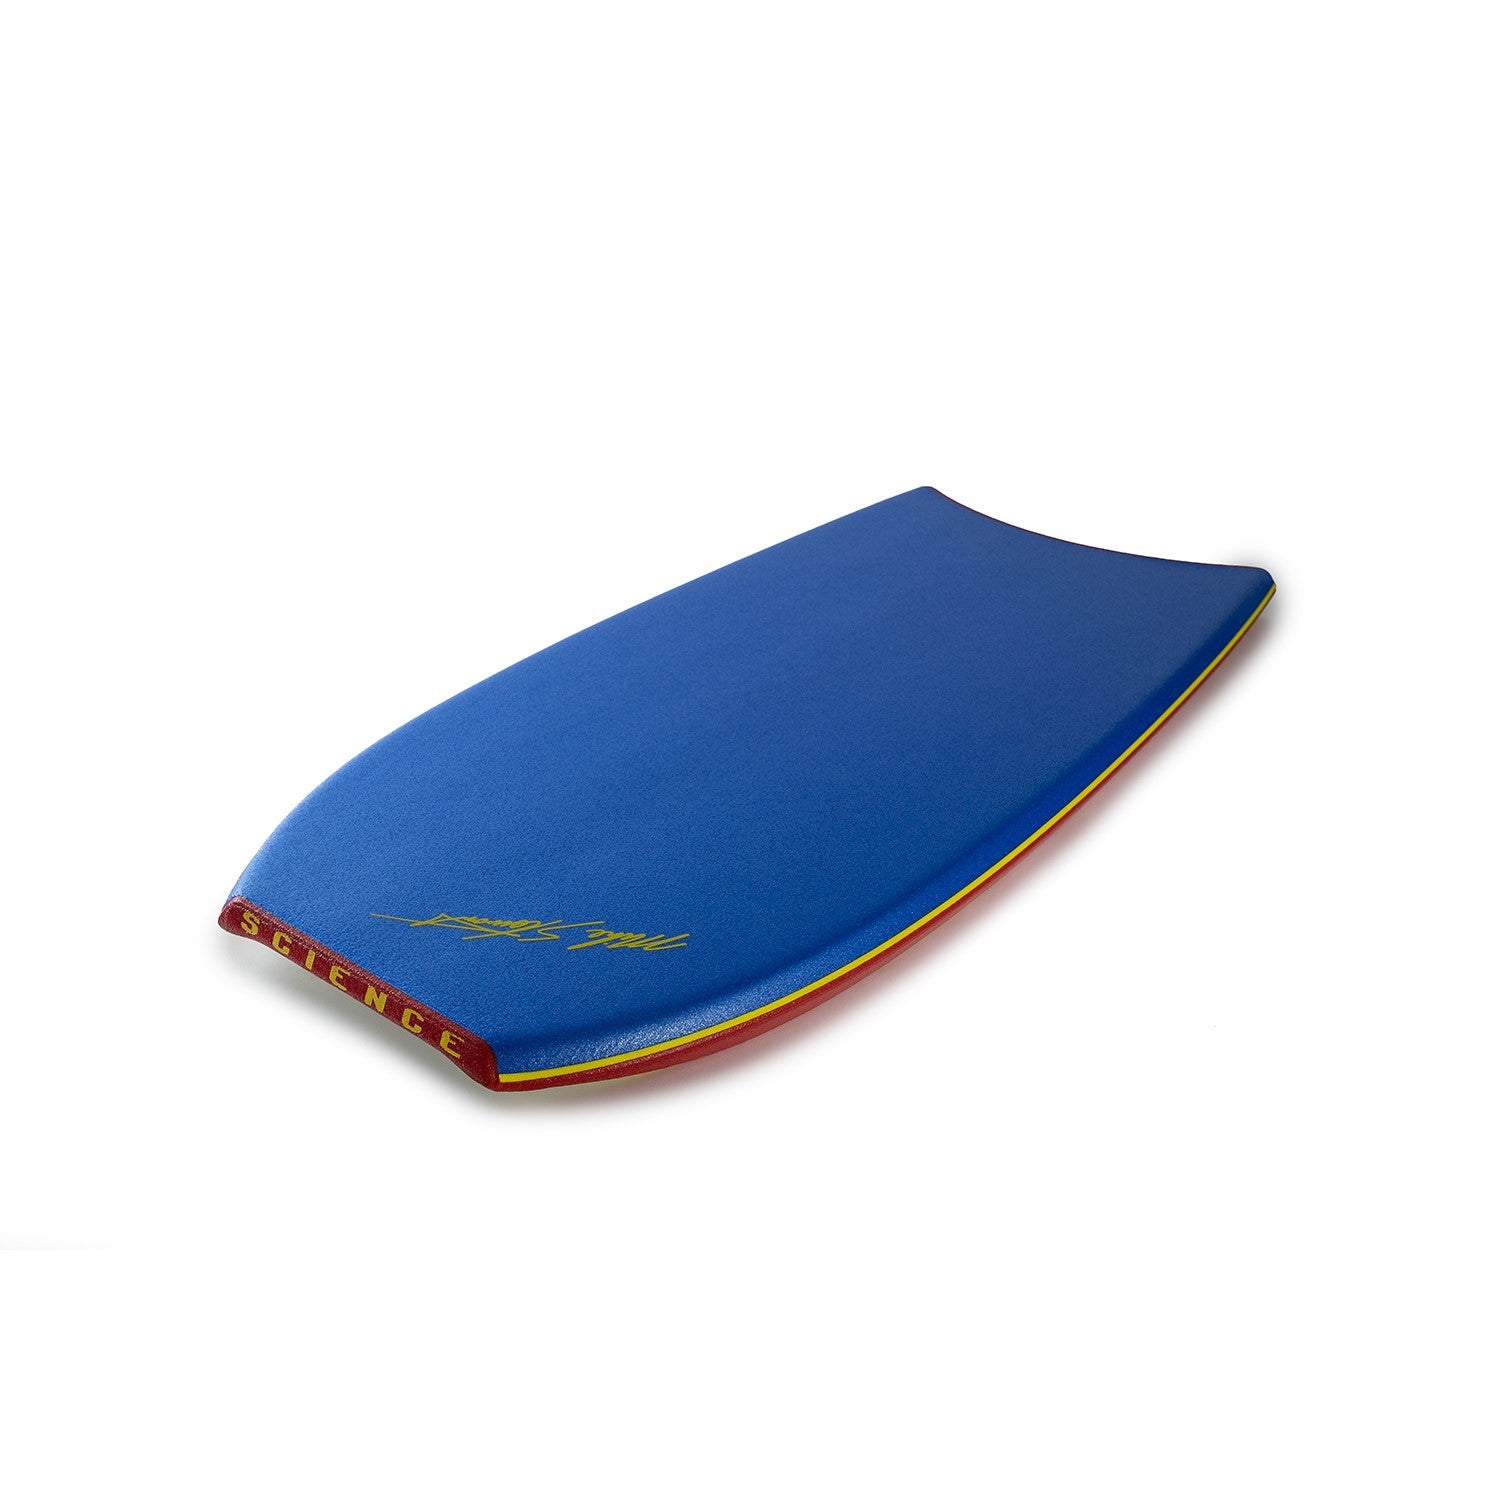 Science Bodyboard - Style Loaded F4 Quad Vent PP - Royal Blue / White